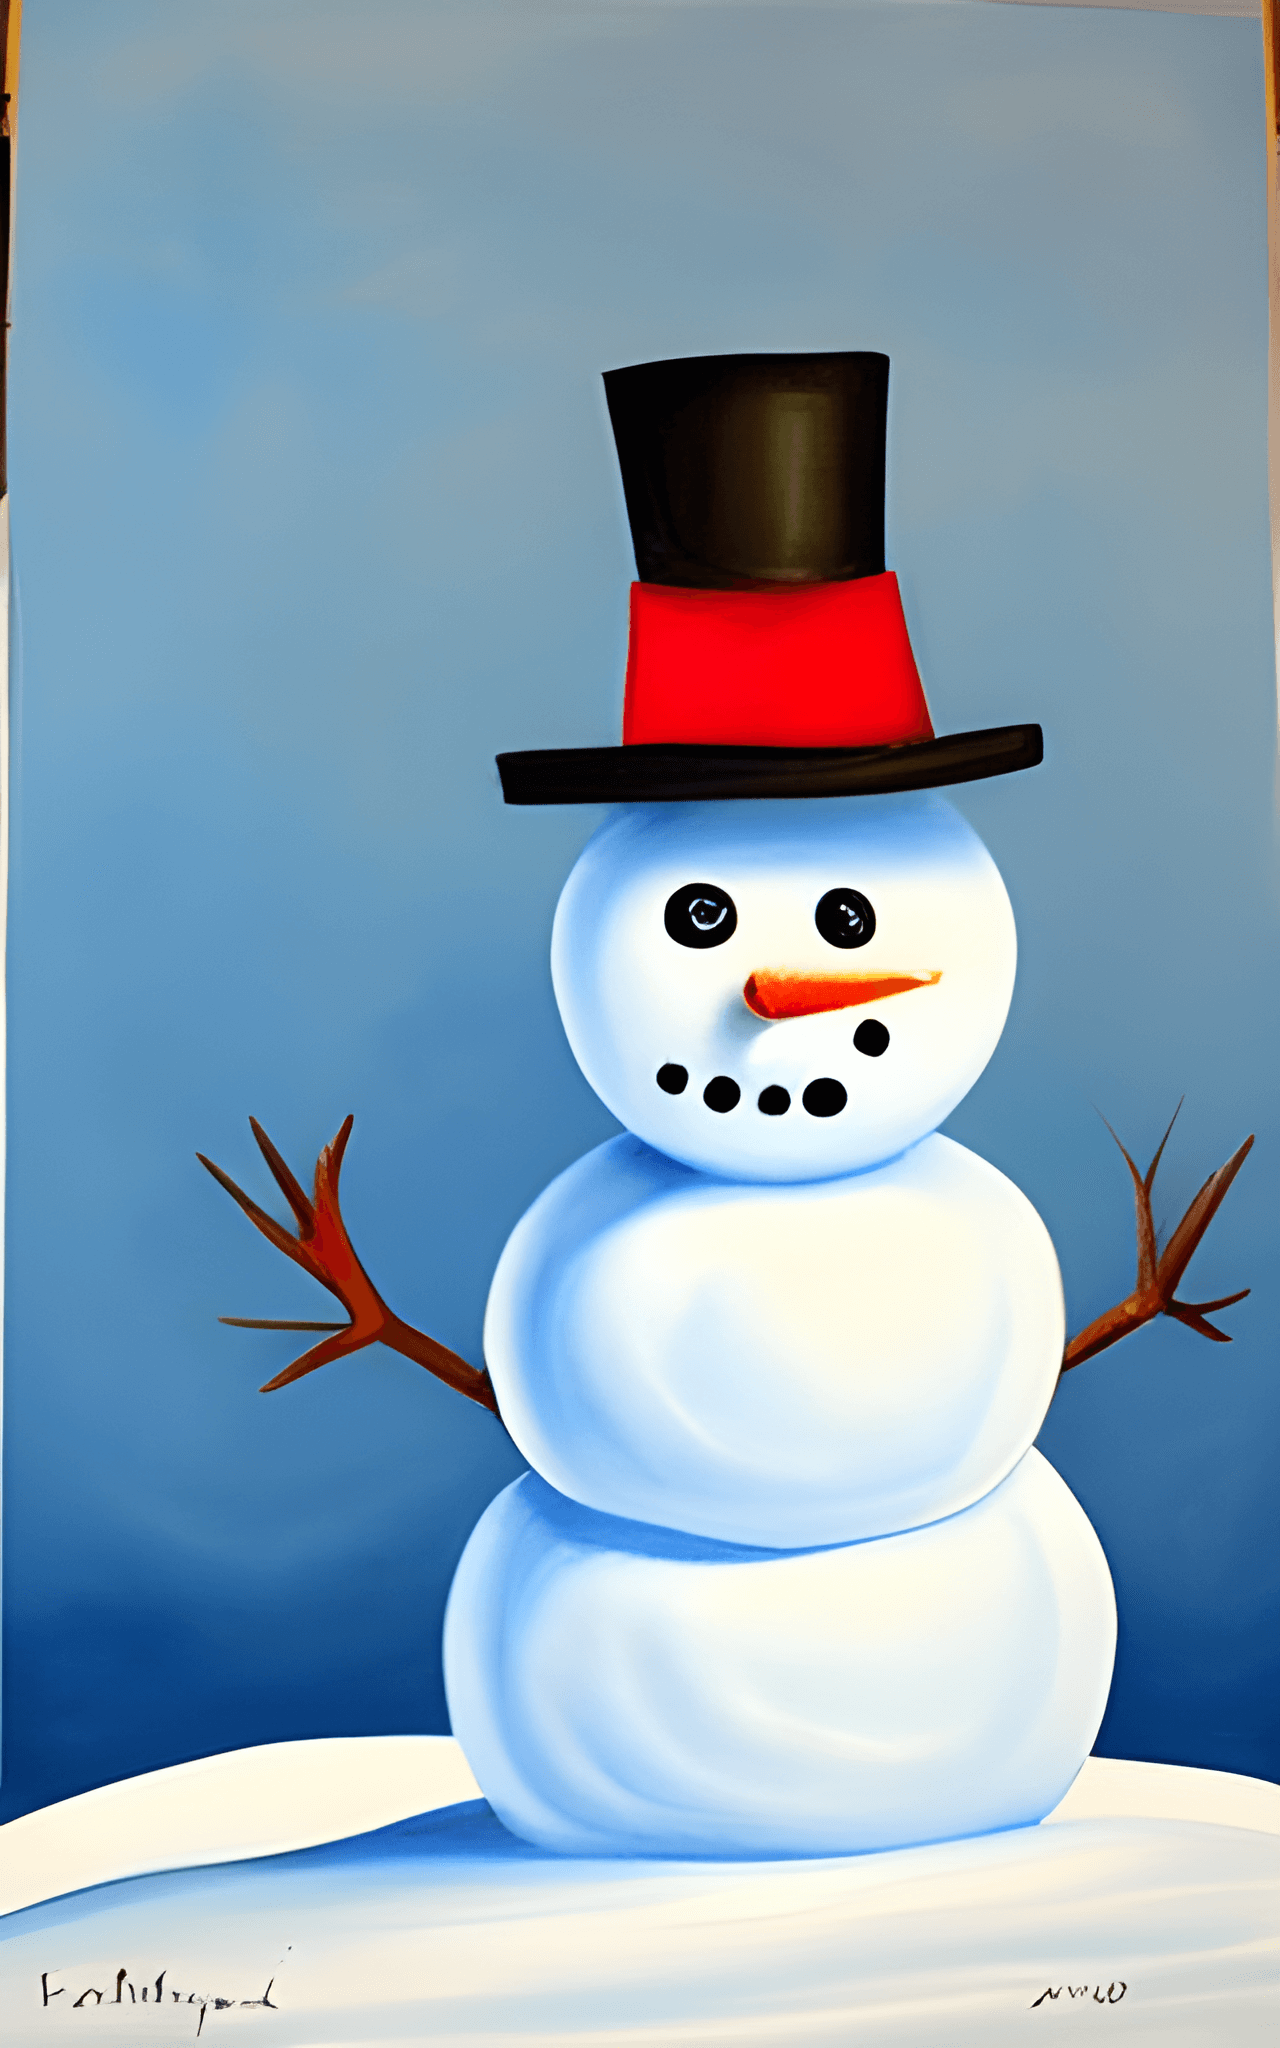 A painting of a snowman wearing a black and red hat. - Snow